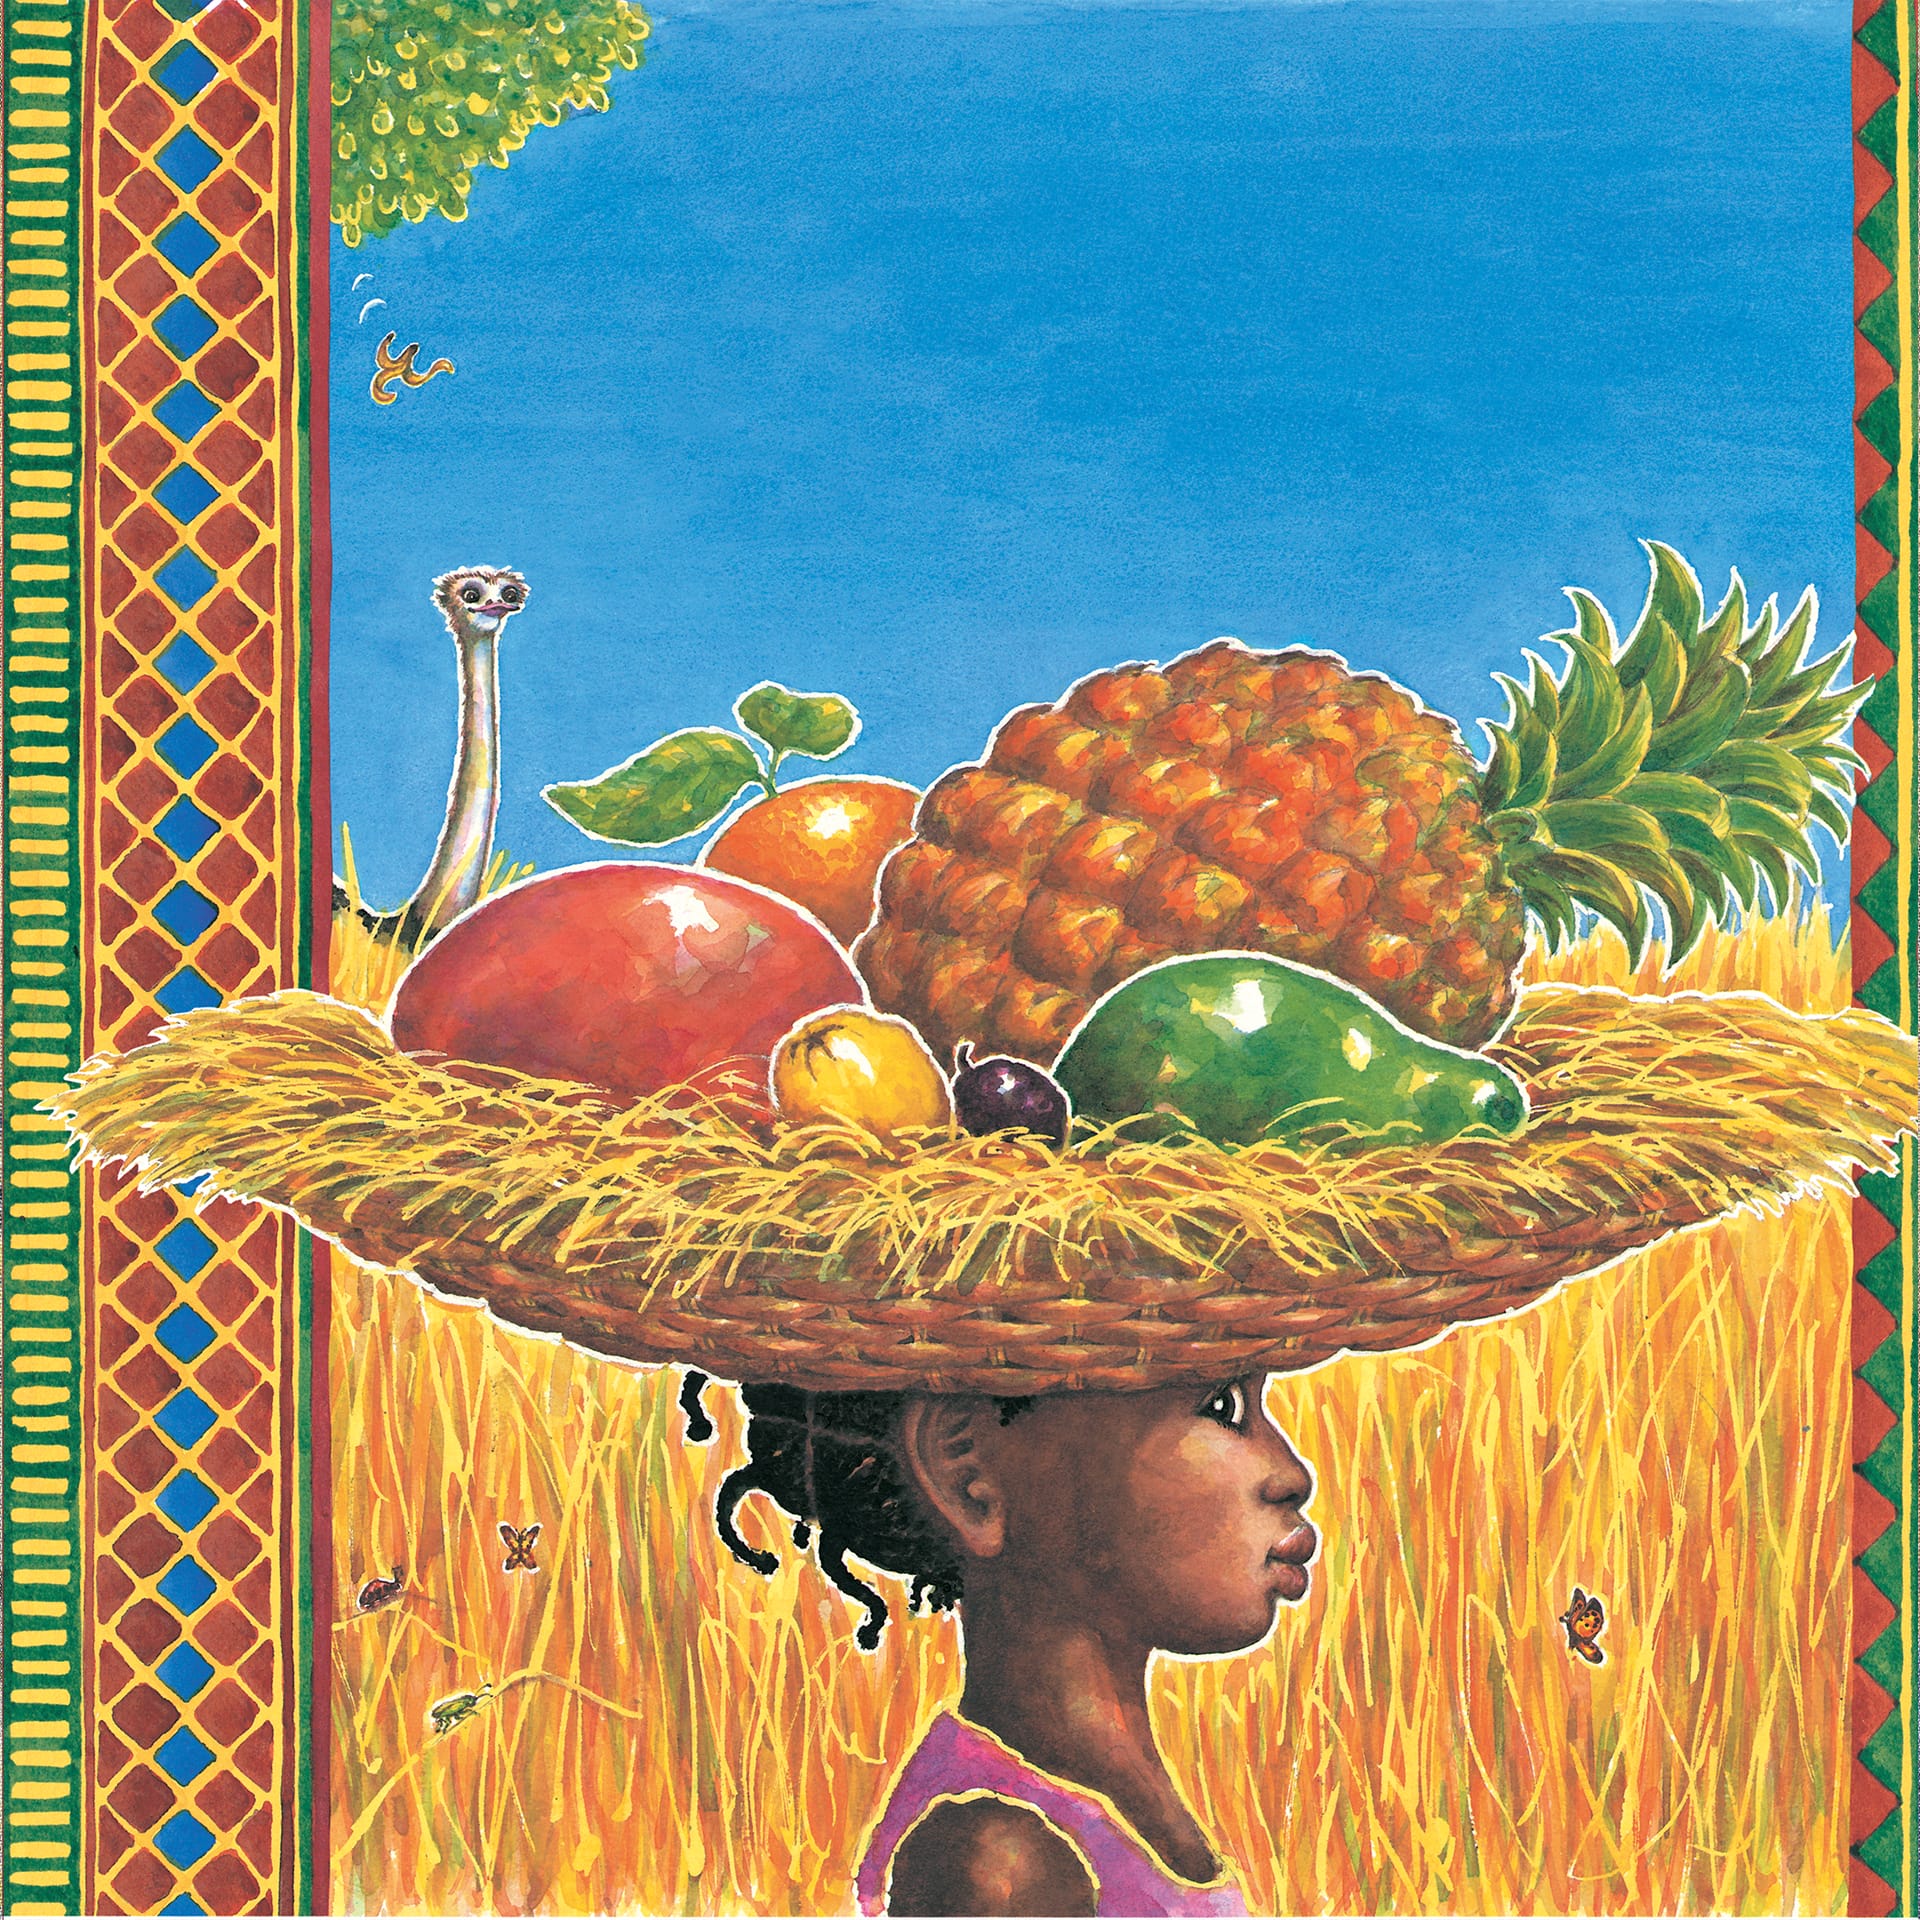 An illustration of a young girl with a bowl of fruit on her head.